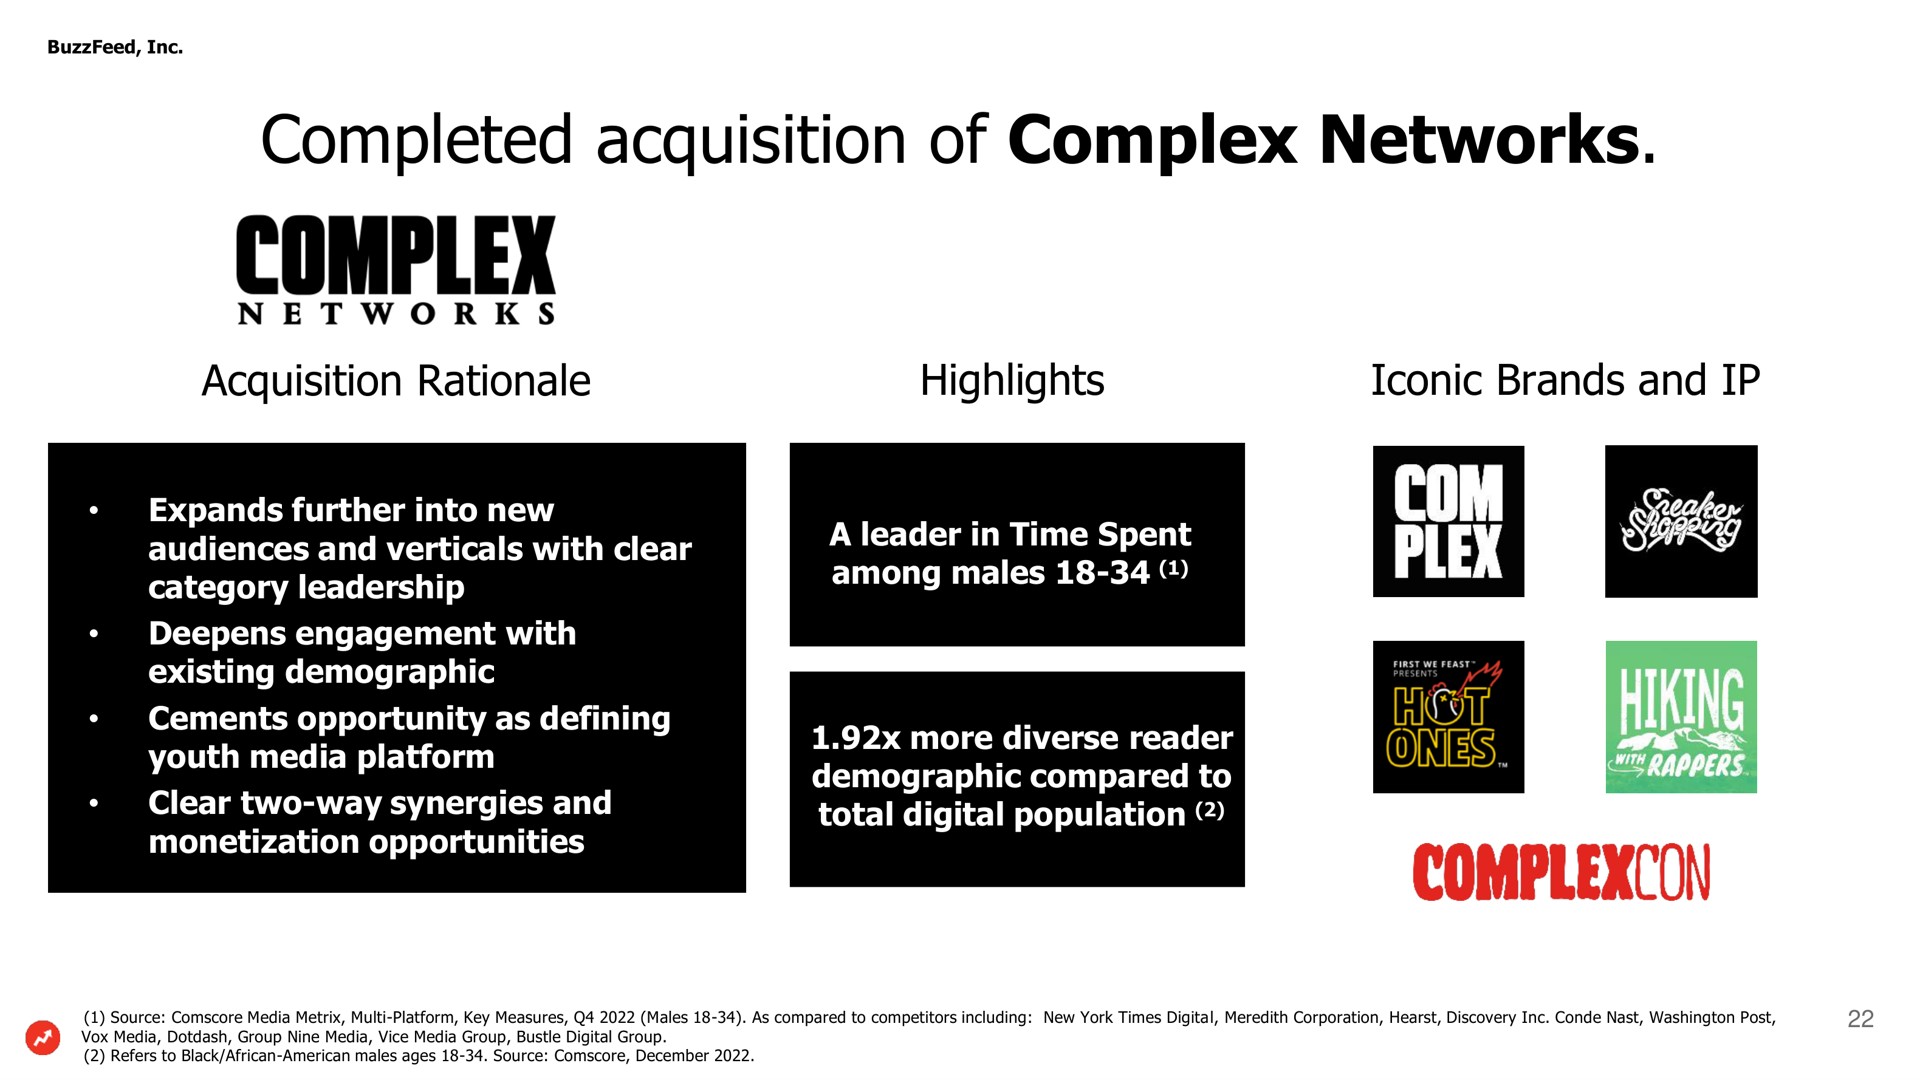 completed acquisition of complex networks | BuzzFeed